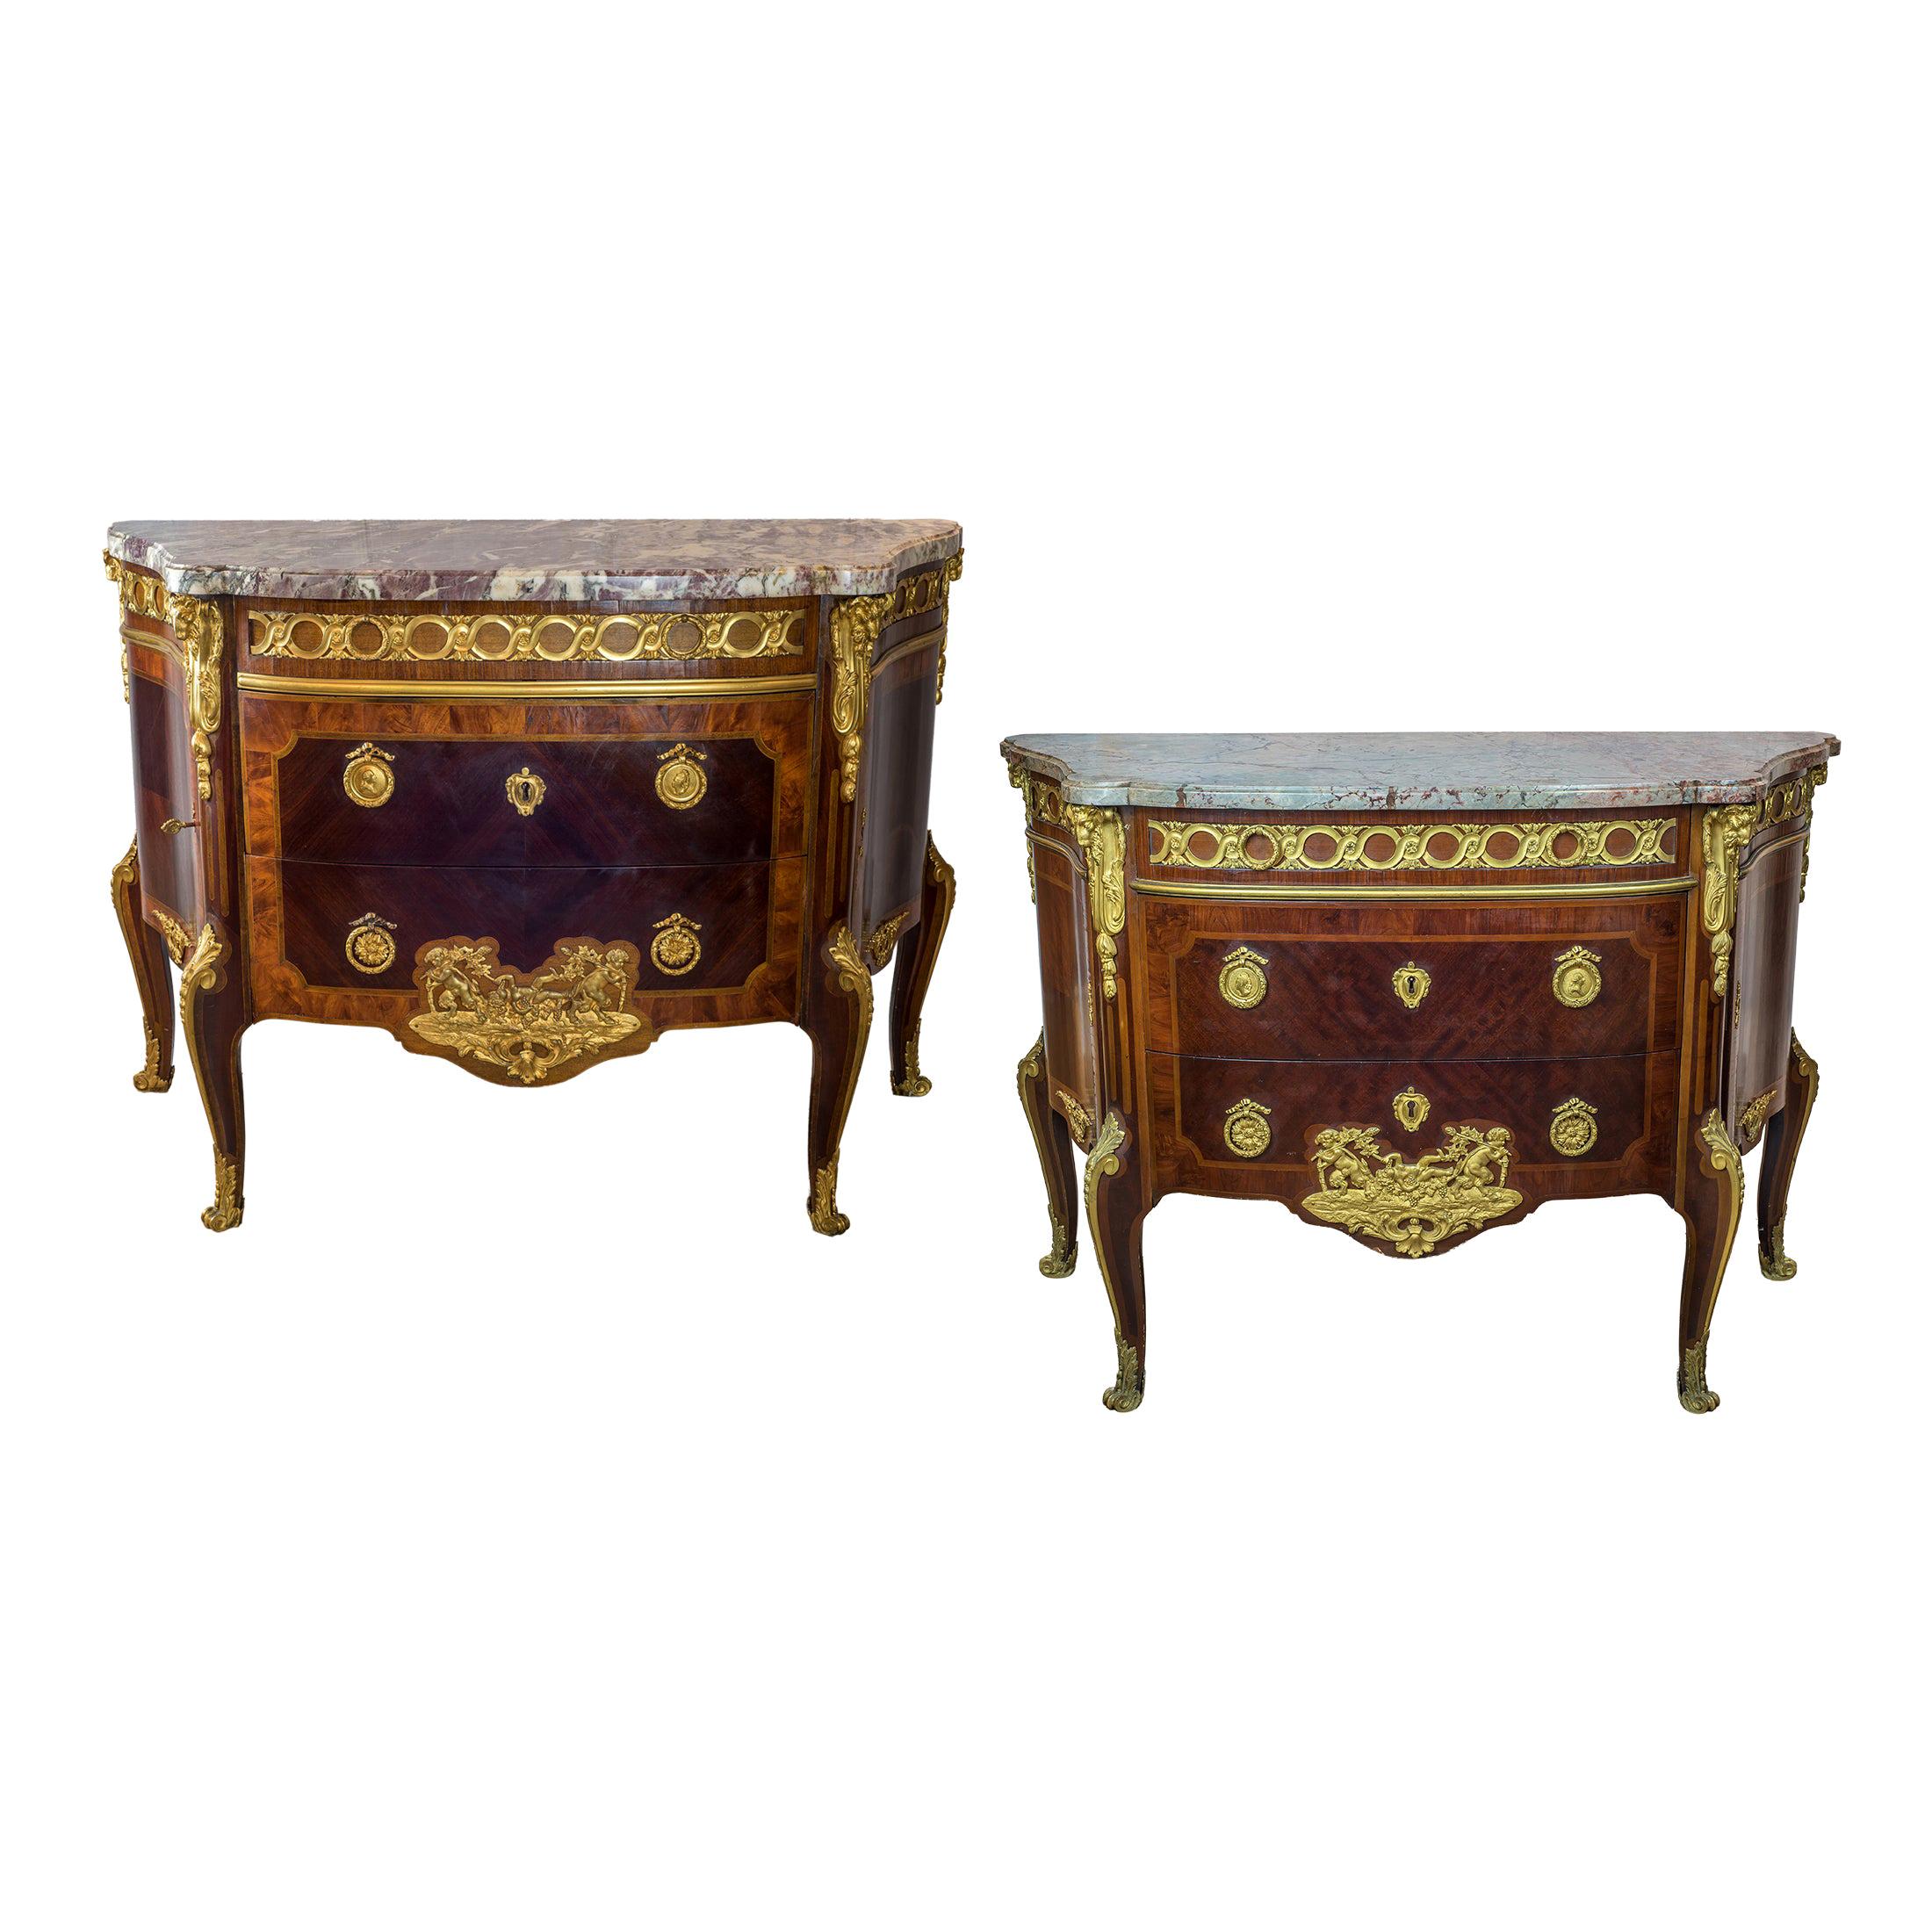 Pair of Gilt Bronze-Mounted Tulipwood and Amaranth Marble-Top Commode For Sale